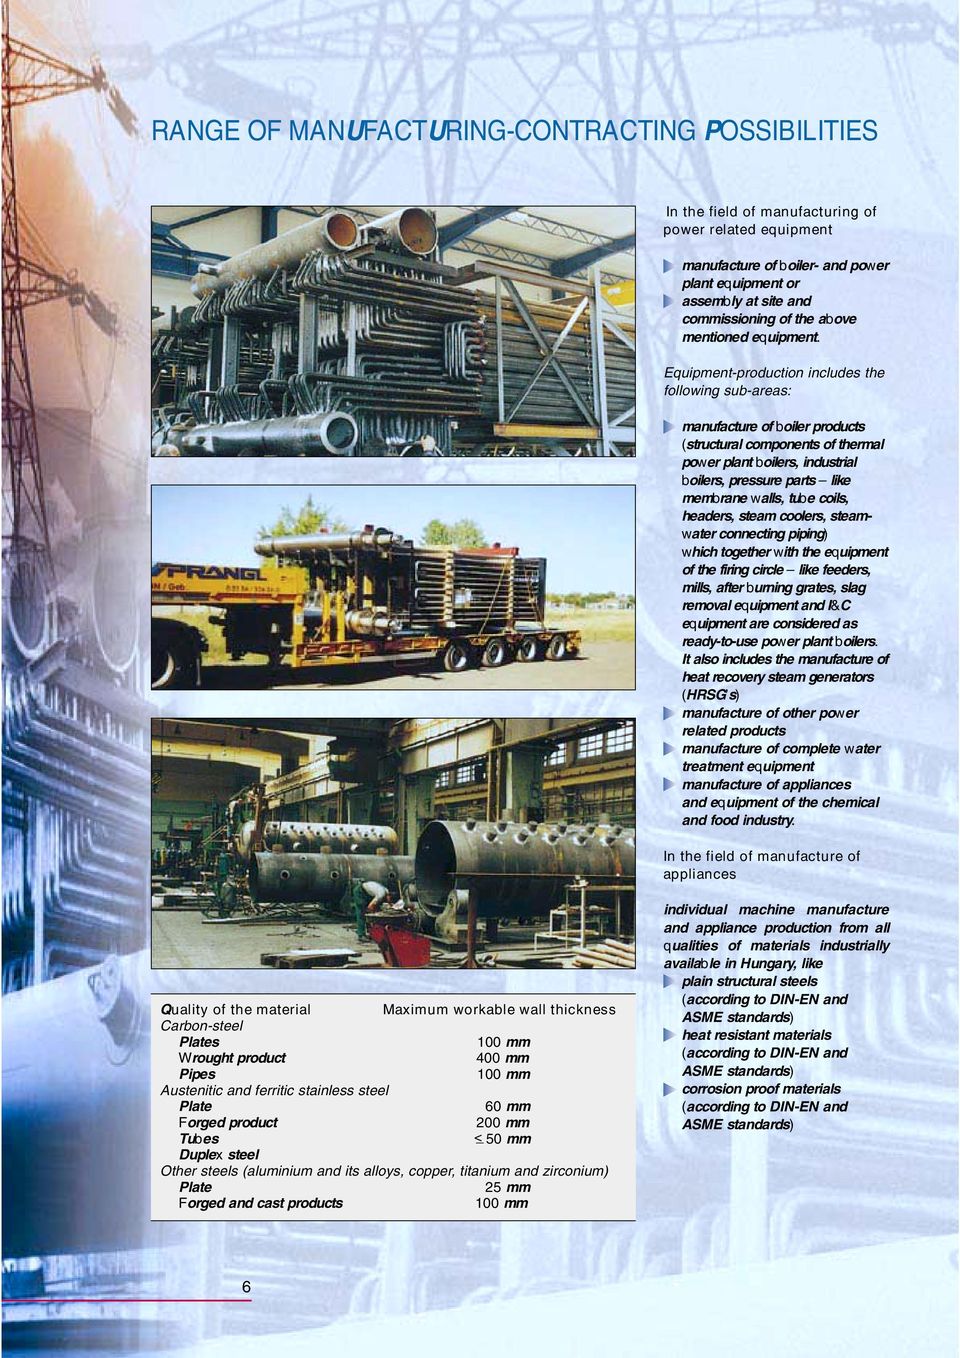 Equipment-production includes the following sub-areas: manufacture of boiler products (structural components of thermal power plant boilers, industrial boilers, pressure parts like membrane walls,